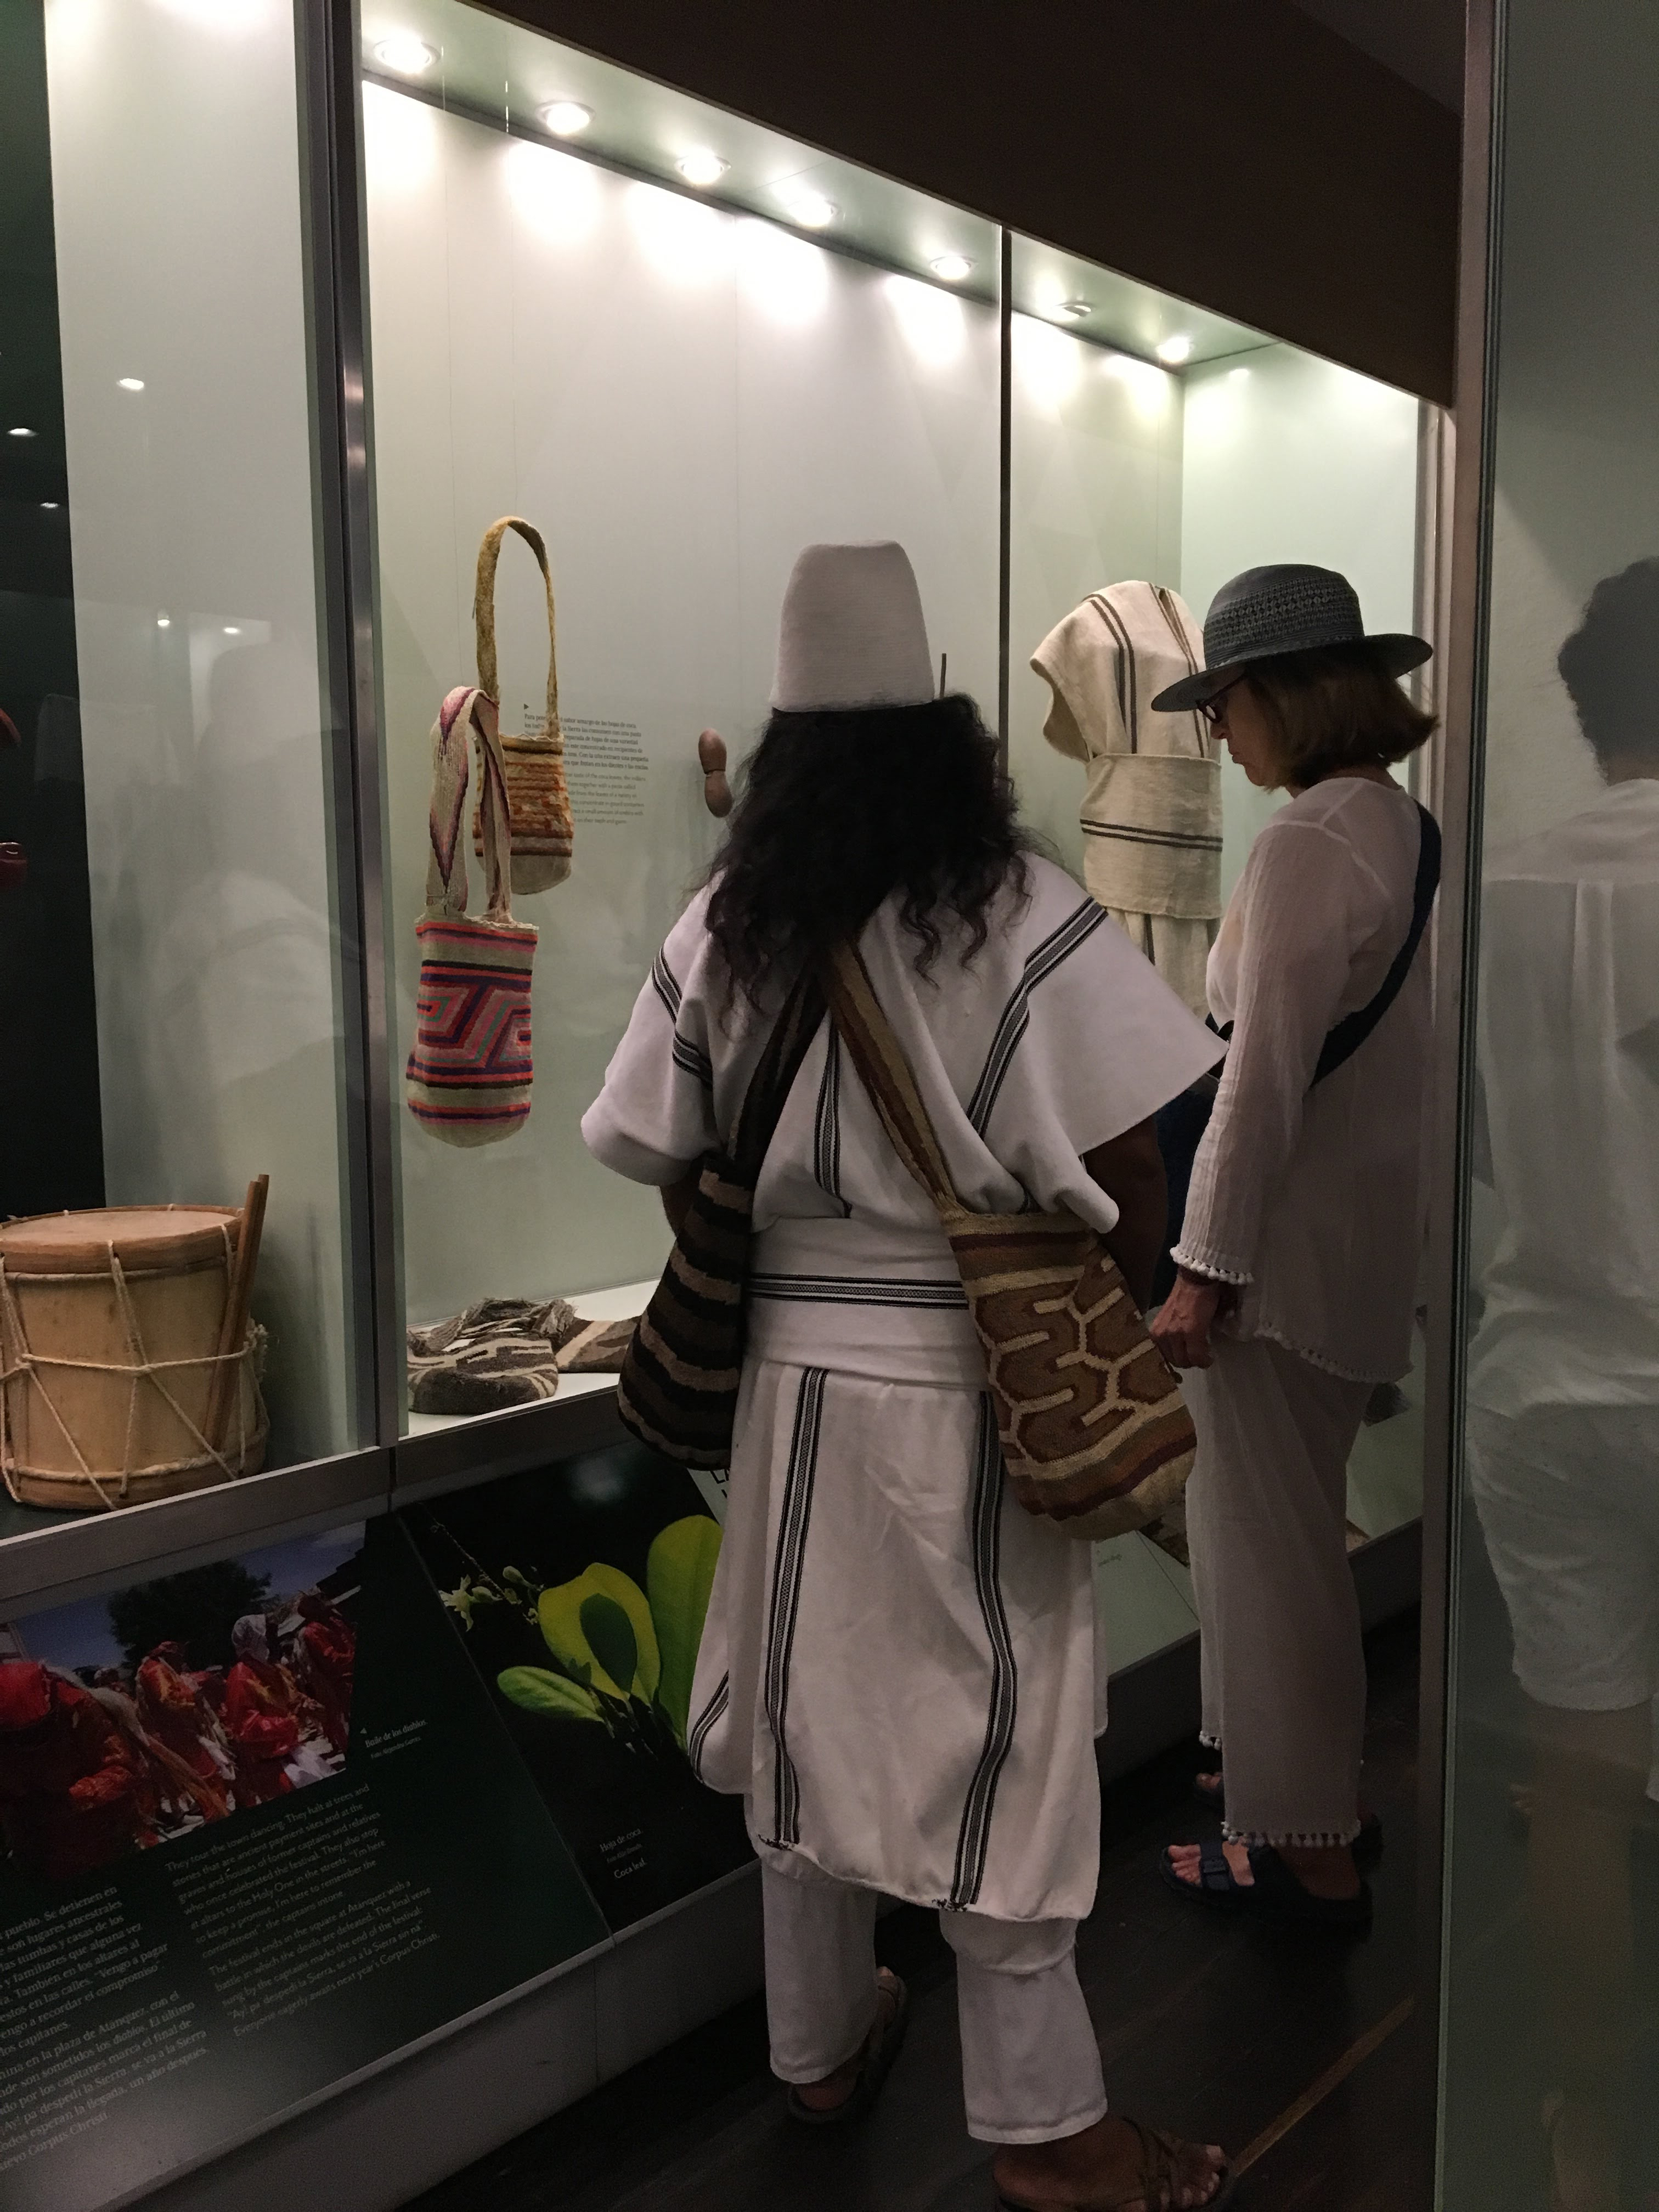 A member of the Arhuaco community looking at Arhuaco objects in the Museo del Oro Santa Marta